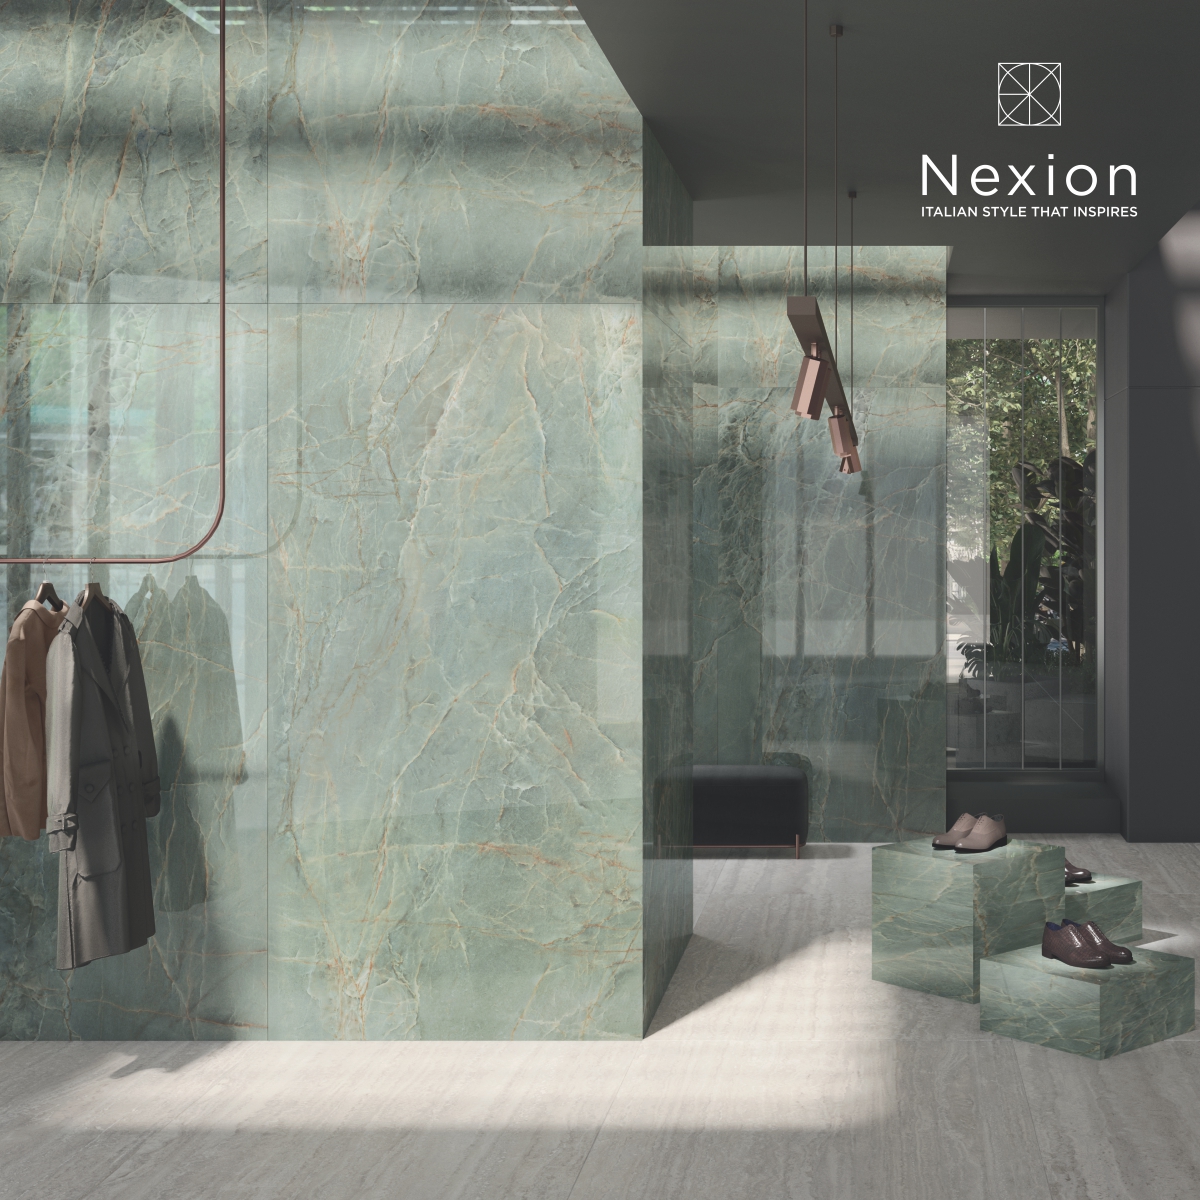 Signature Collection expands with the new Quarzo Verde Aqua,Precious exotic stone re-interpreted with different shades of green, thanks to @nexiontiles special yellow and red inks, use to give elegance and luxury to spaces.

#nexion #nexiontiles #designforall #tilesdesign #gbrc